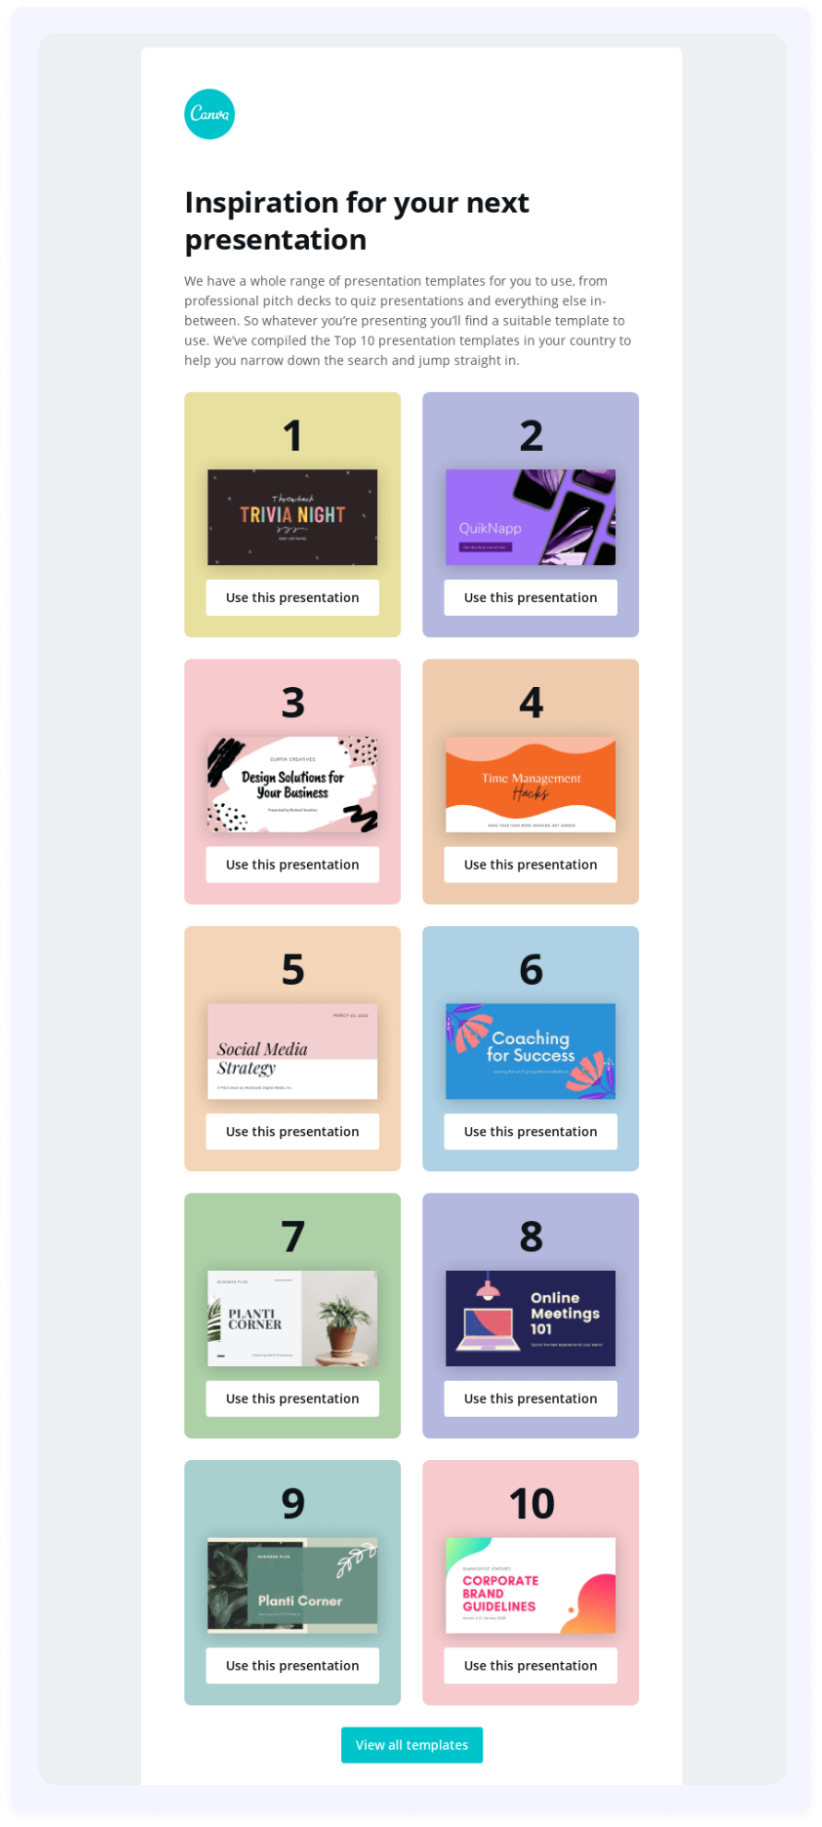 Canva's top 10 template listicle newsletter